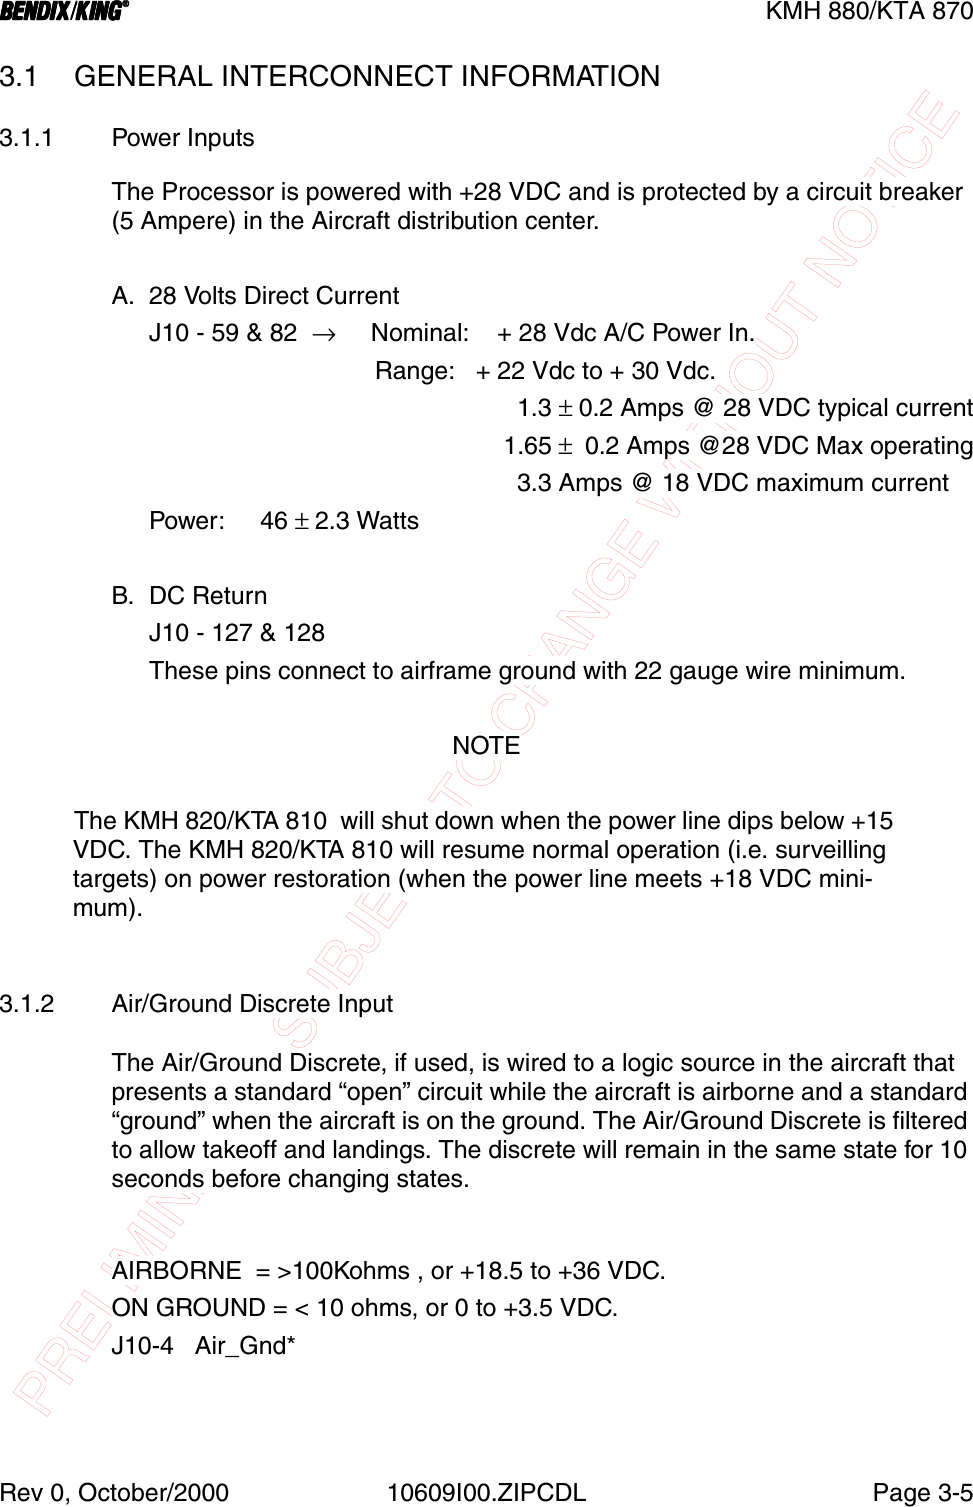 PRELIMINARY - SUBJECT TO CHANGE WITHOUT NOTICEBBBBKMH 880/KTA 870Rev 0, October/2000 10609I00.ZIPCDL Page 3-53.1 GENERAL INTERCONNECT INFORMATION3.1.1 Power InputsThe Processor is powered with +28 VDC and is protected by a circuit breaker (5 Ampere) in the Aircraft distribution center.A. 28 Volts Direct CurrentJ10 - 59 &amp; 82  →     Nominal:    + 28 Vdc A/C Power In.                         Range:   + 22 Vdc to + 30 Vdc.                                                     1.3 ± 0.2 Amps @ 28 VDC typical current                                                     1.65 ±  0.2 Amps @28 VDC Max operating                                                     3.3 Amps @ 18 VDC maximum currentPower:     46 ± 2.3 WattsB. DC ReturnJ10 - 127 &amp; 128These pins connect to airframe ground with 22 gauge wire minimum.NOTEThe KMH 820/KTA 810  will shut down when the power line dips below +15 VDC. The KMH 820/KTA 810 will resume normal operation (i.e. surveilling targets) on power restoration (when the power line meets +18 VDC mini-mum).3.1.2 Air/Ground Discrete InputThe Air/Ground Discrete, if used, is wired to a logic source in the aircraft that presents a standard “open” circuit while the aircraft is airborne and a standard “ground” when the aircraft is on the ground. The Air/Ground Discrete is filtered to allow takeoff and landings. The discrete will remain in the same state for 10 seconds before changing states.AIRBORNE  = &gt;100Kohms , or +18.5 to +36 VDC.ON GROUND = &lt; 10 ohms, or 0 to +3.5 VDC.J10-4   Air_Gnd*